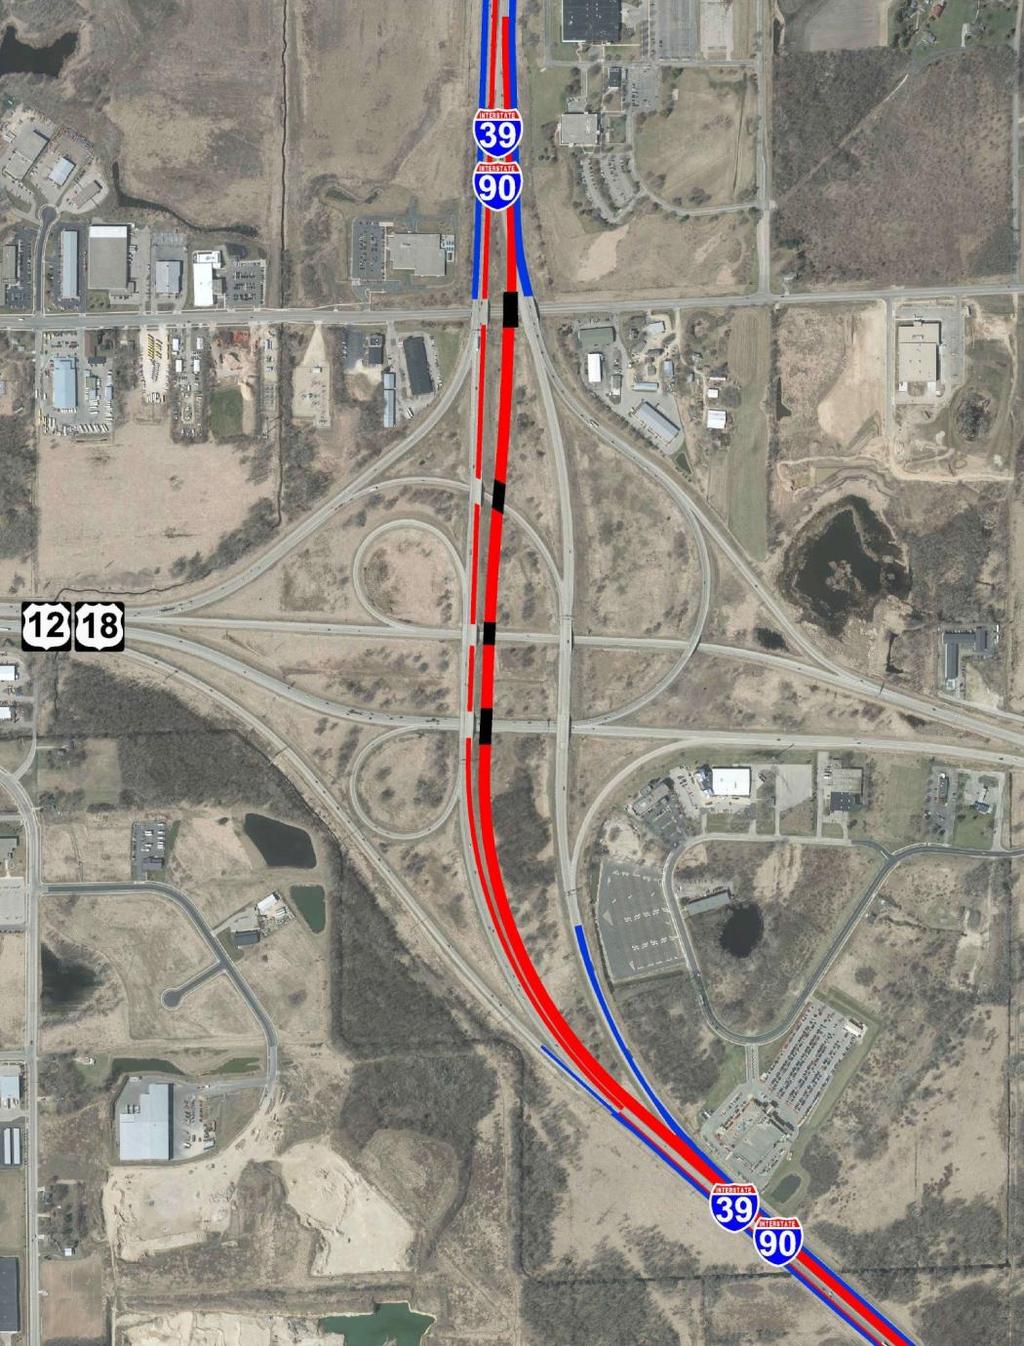 ADD AN AUXILIARY LANE FOR THE SB I-39/90 EXIT RAMP TO WB BELTLINE ADD A THIRD LANE TO THE EXISTING TWO LANES OF SB I-39/90 EXTEND THE LENGTH OF THE ACCELERATION LANE FOR THE US 12/18 RAMP TO NB